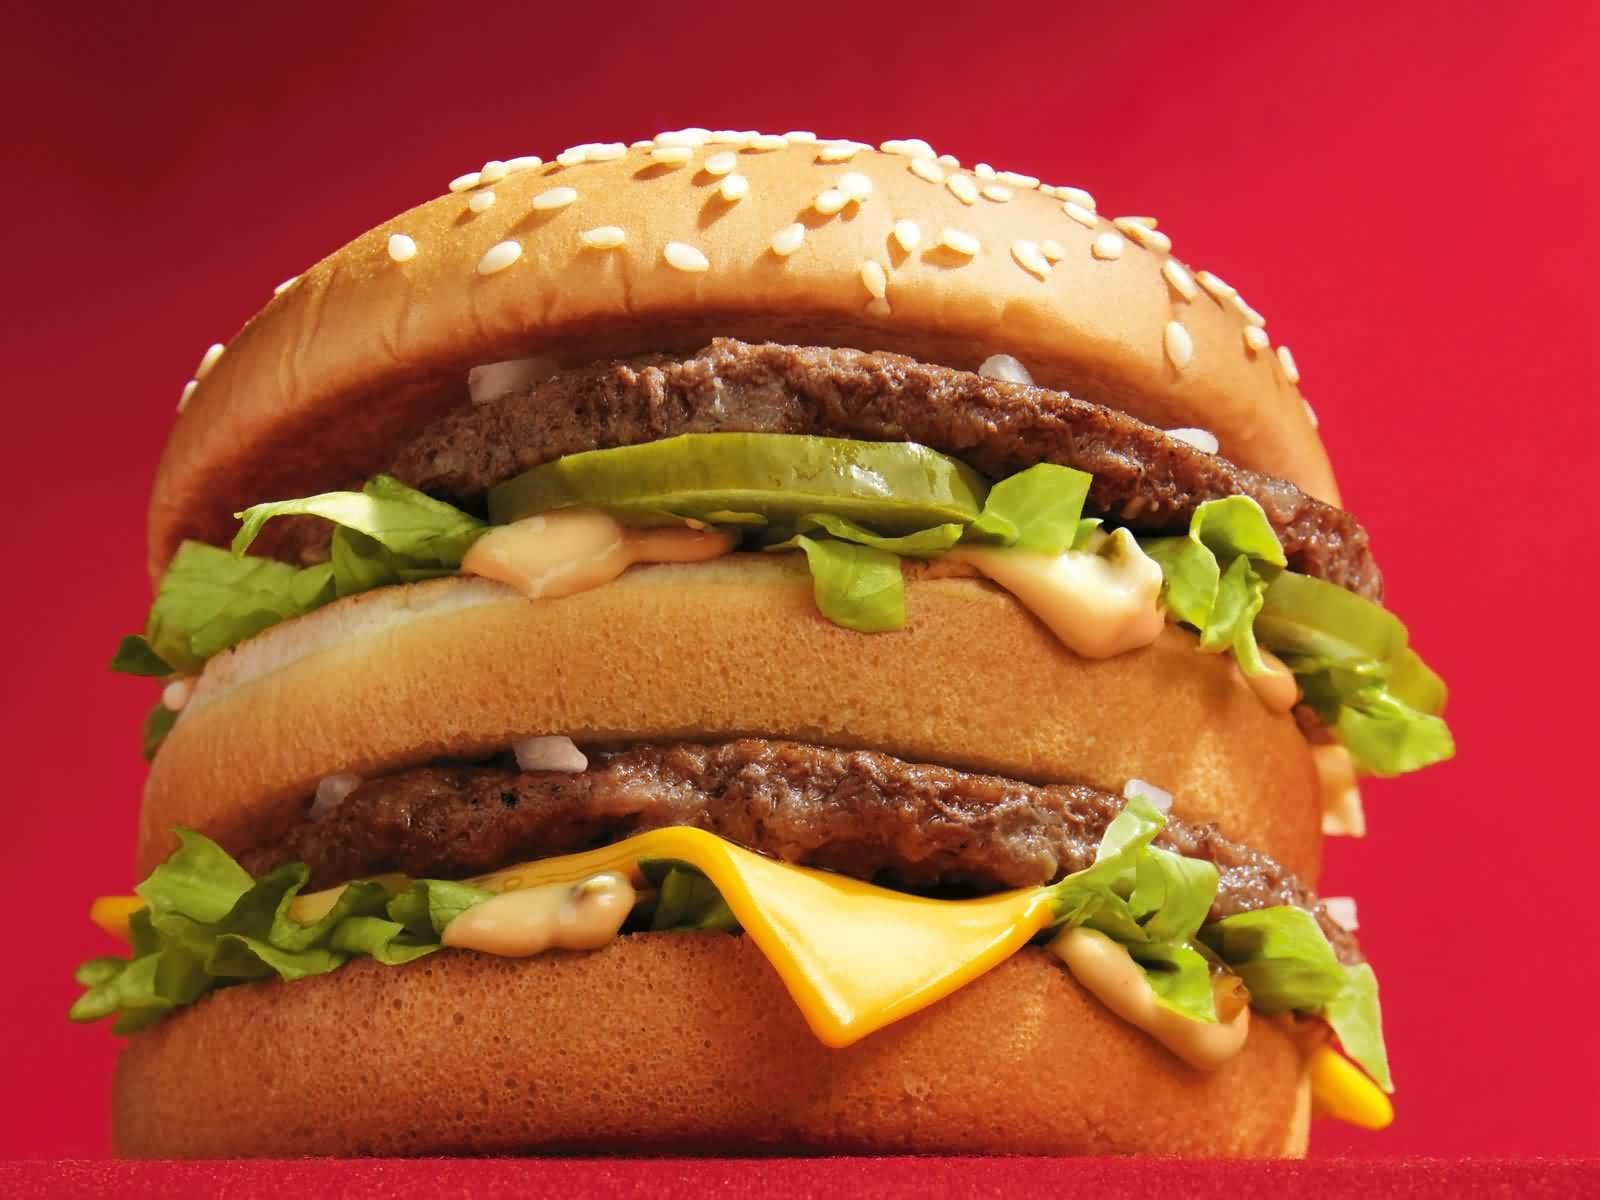 There's a difference between a Big Mac and a Big Mac Meal. The latter is Big Mac with fries and a drink.